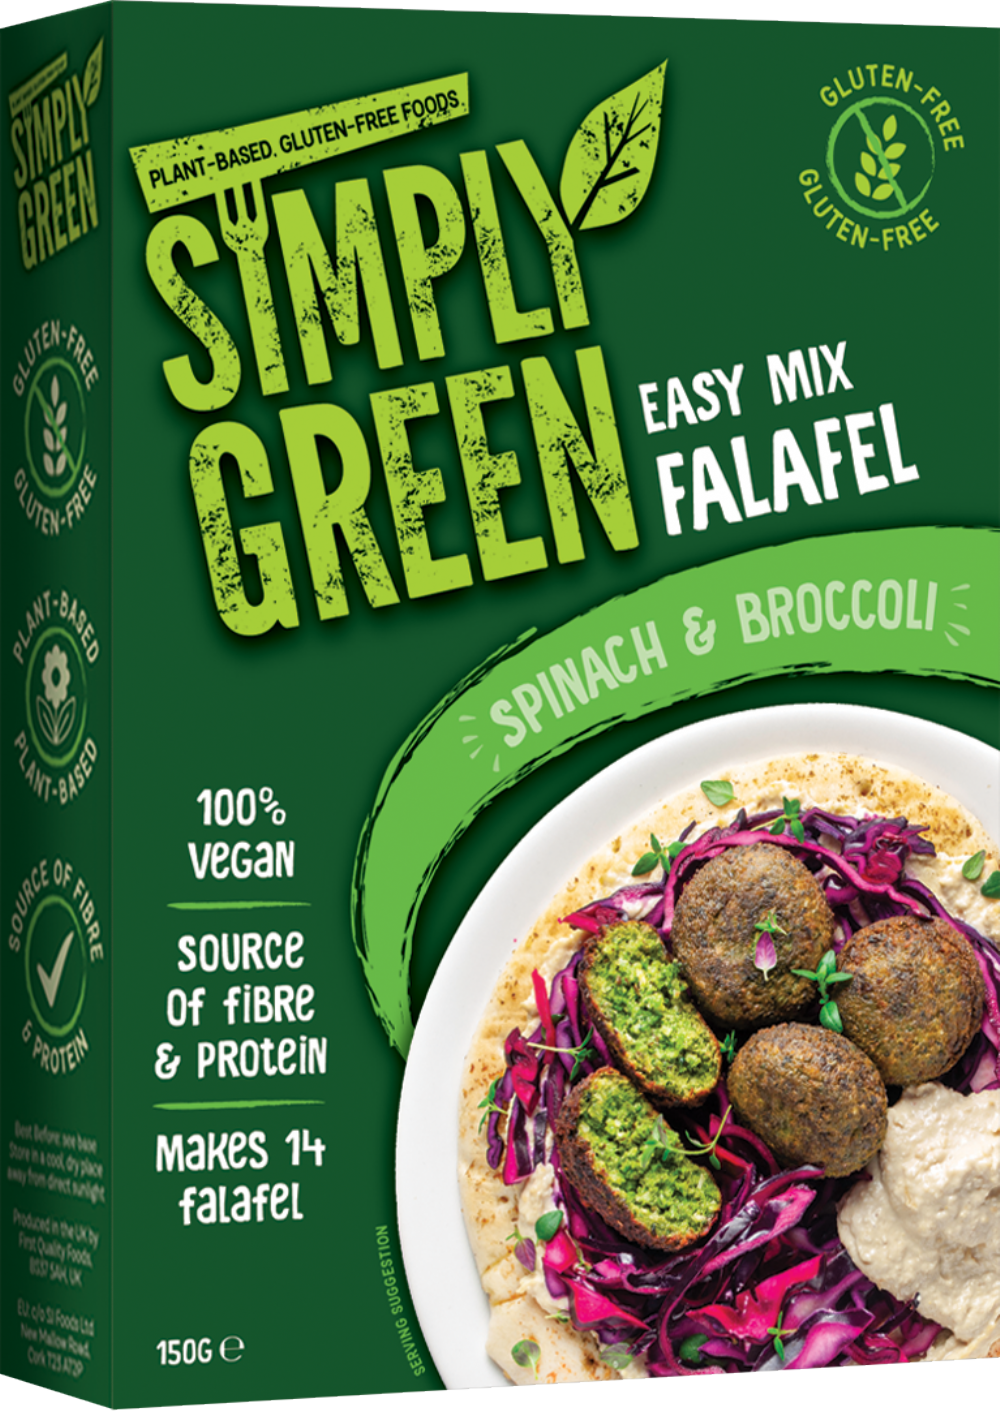 SIMPLY GREEN Easy Mix Falafel - Spinach & Broccoli 150g